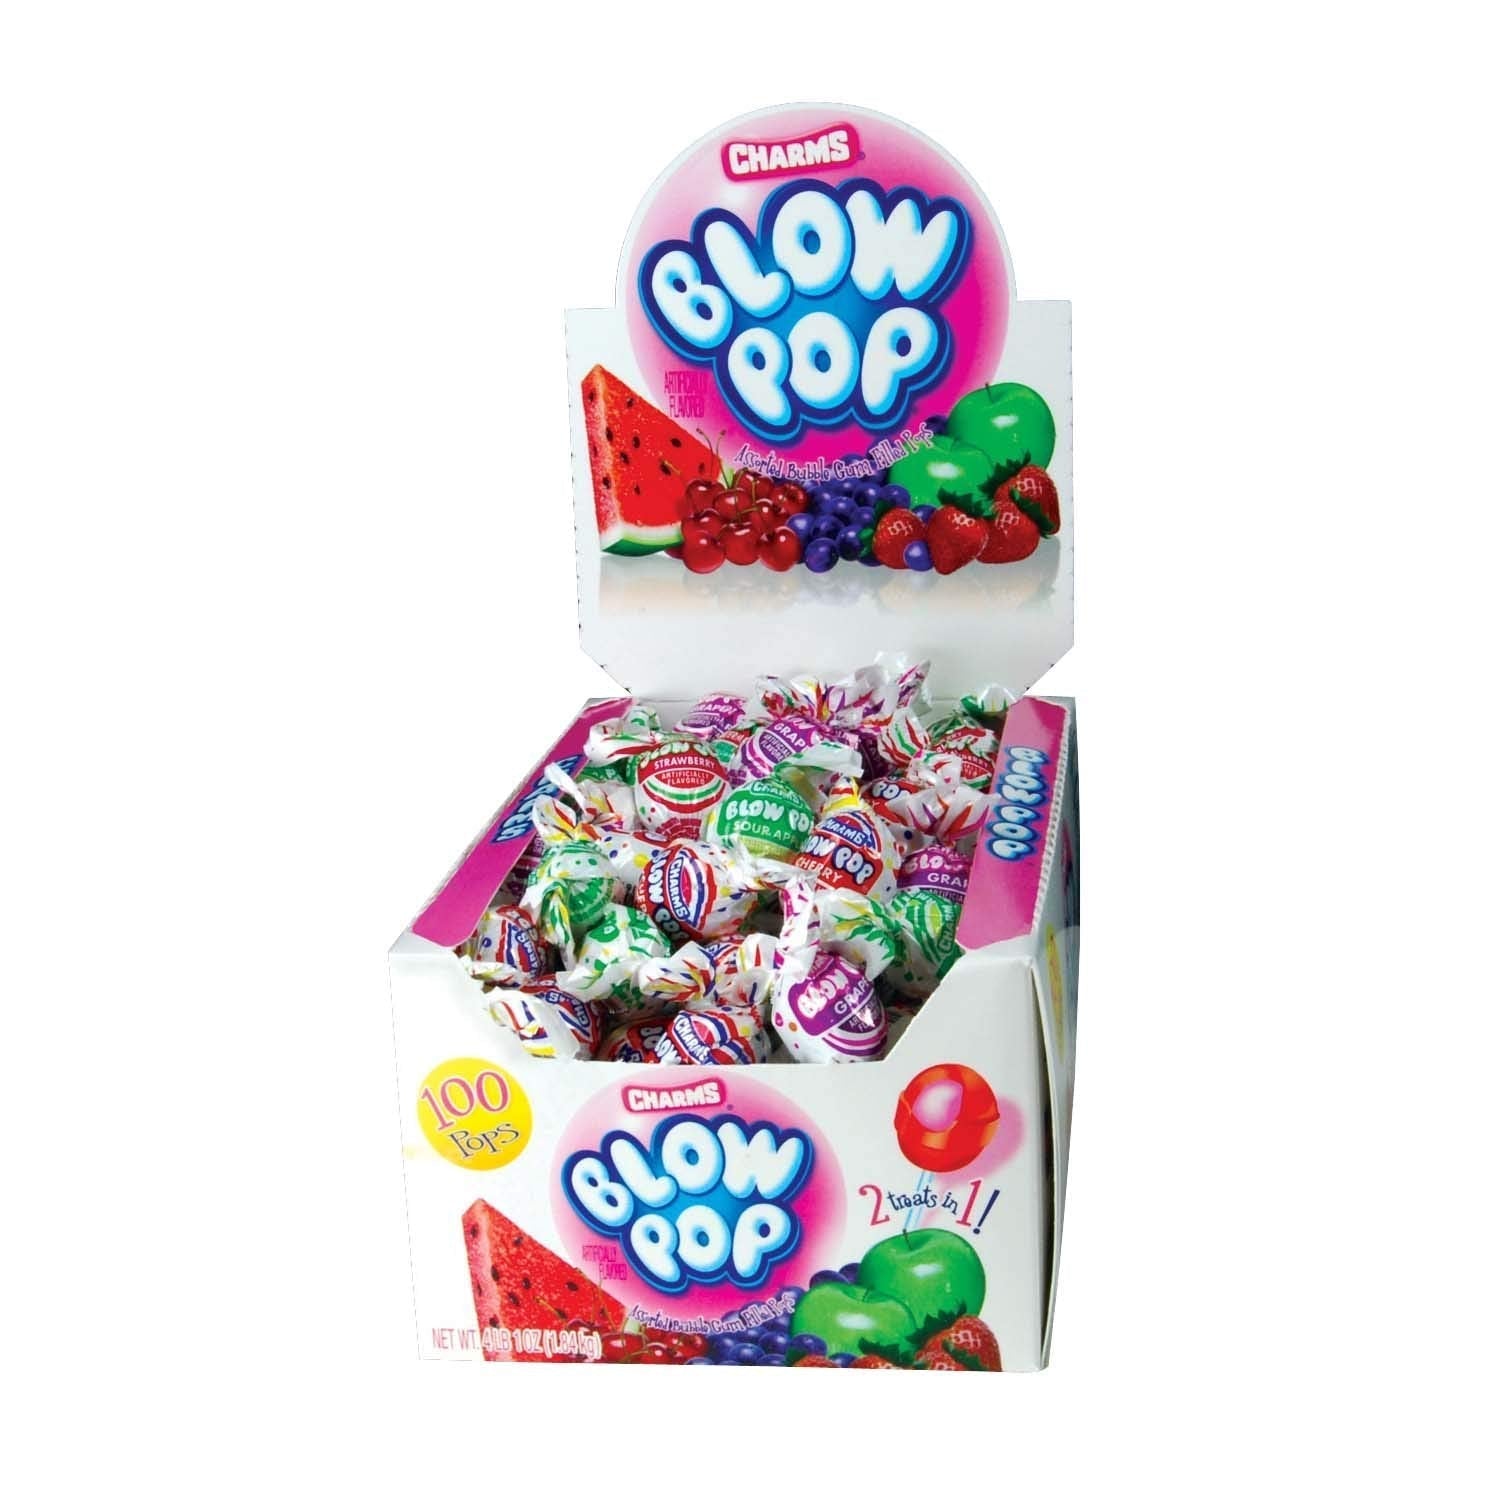 Charms-Charms Blow Pops Assorted Flavors Changemaker--Legacy Toys